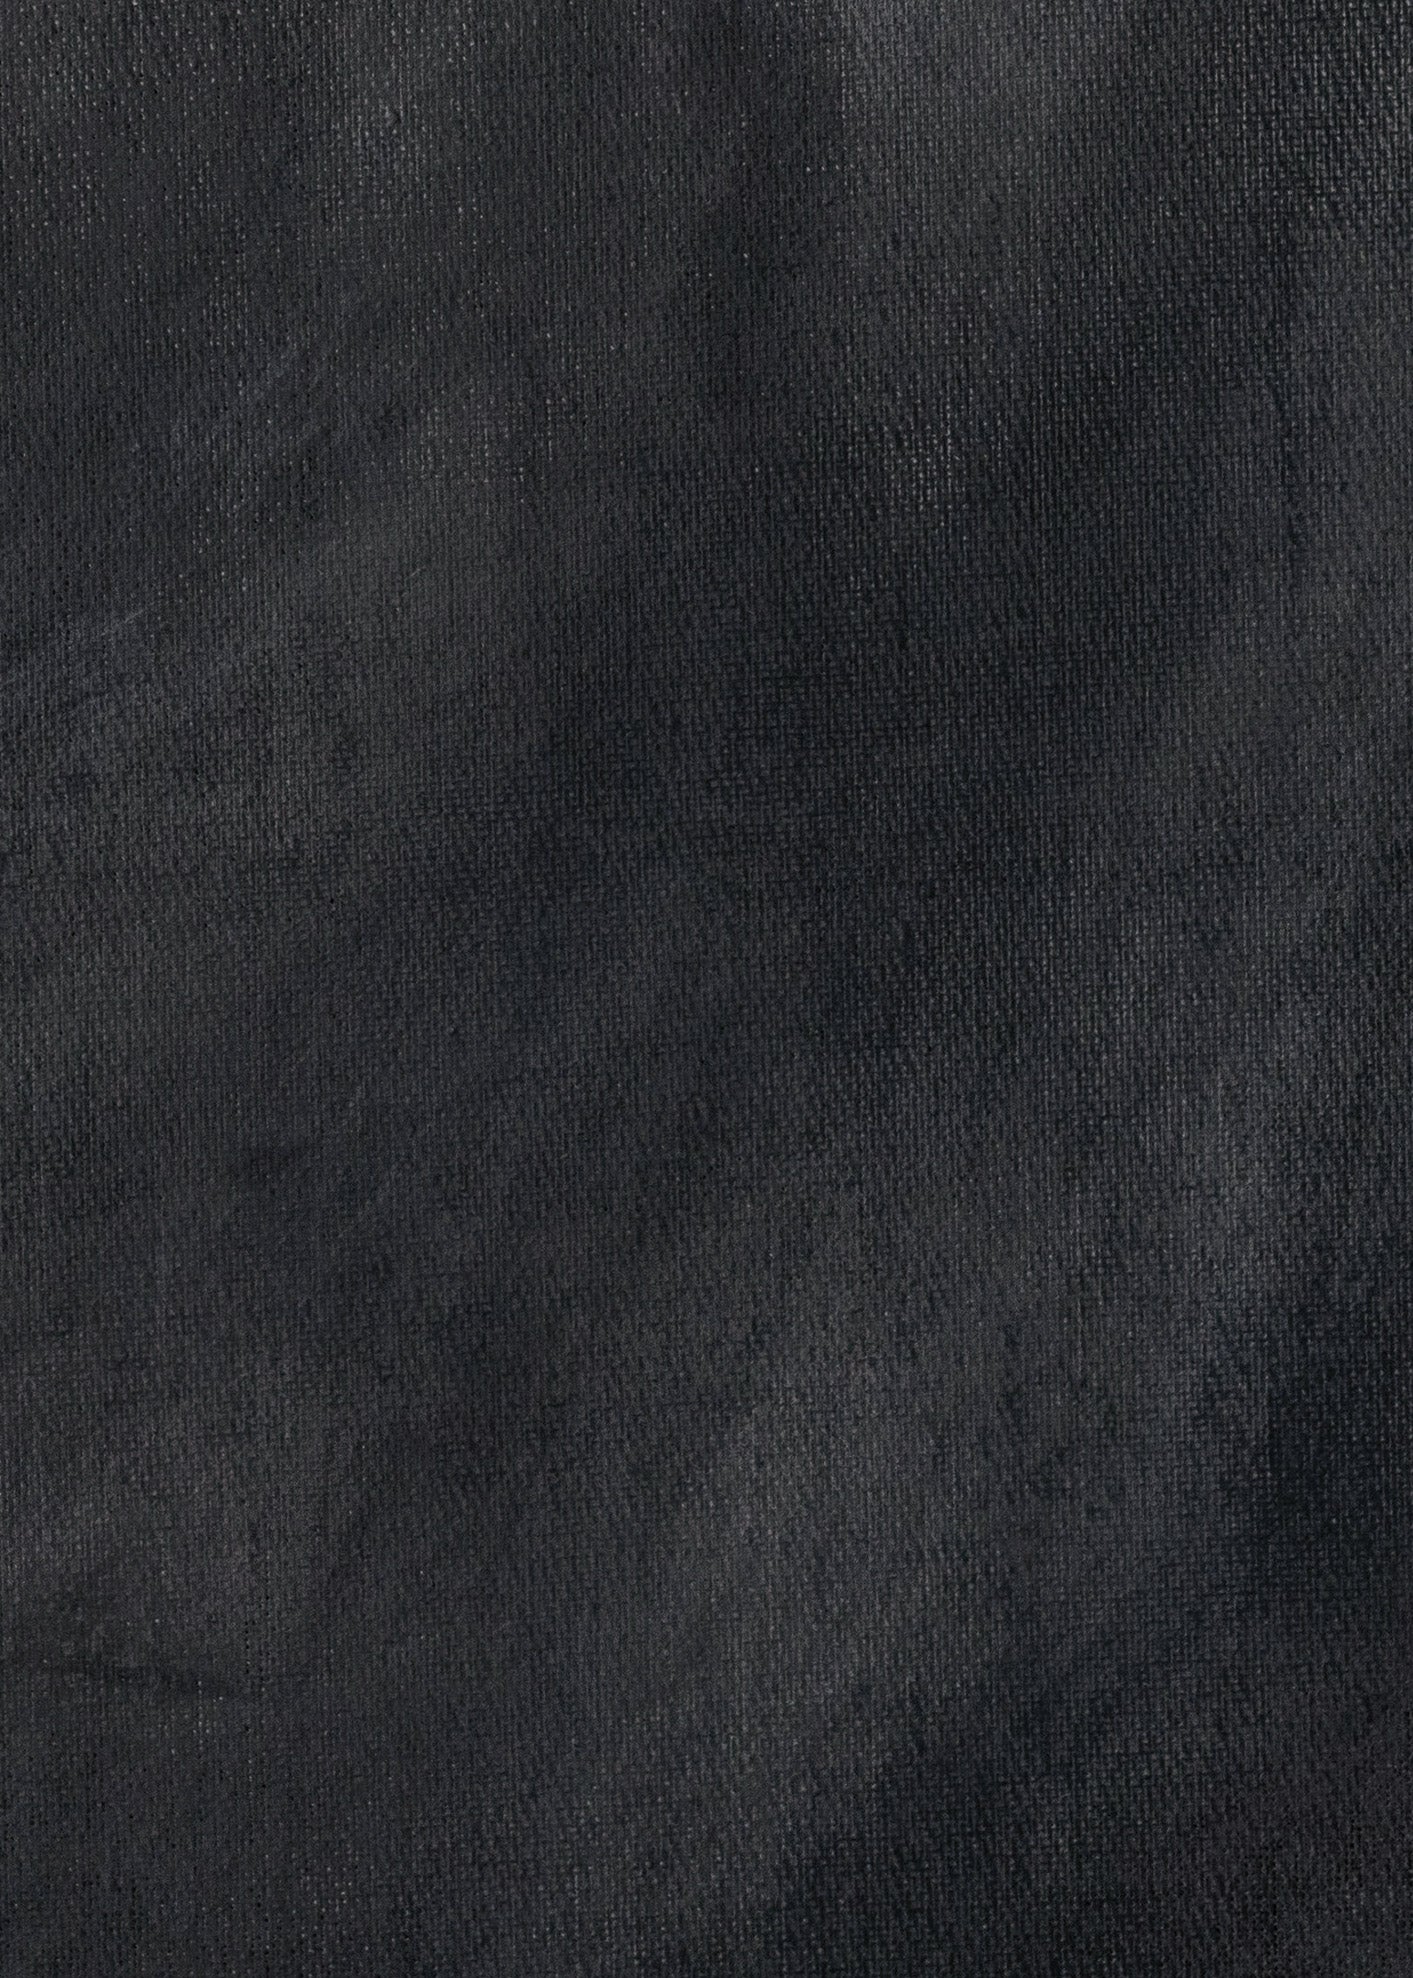 Charcoal Canvas Backdrop by Photography Backdrop Club